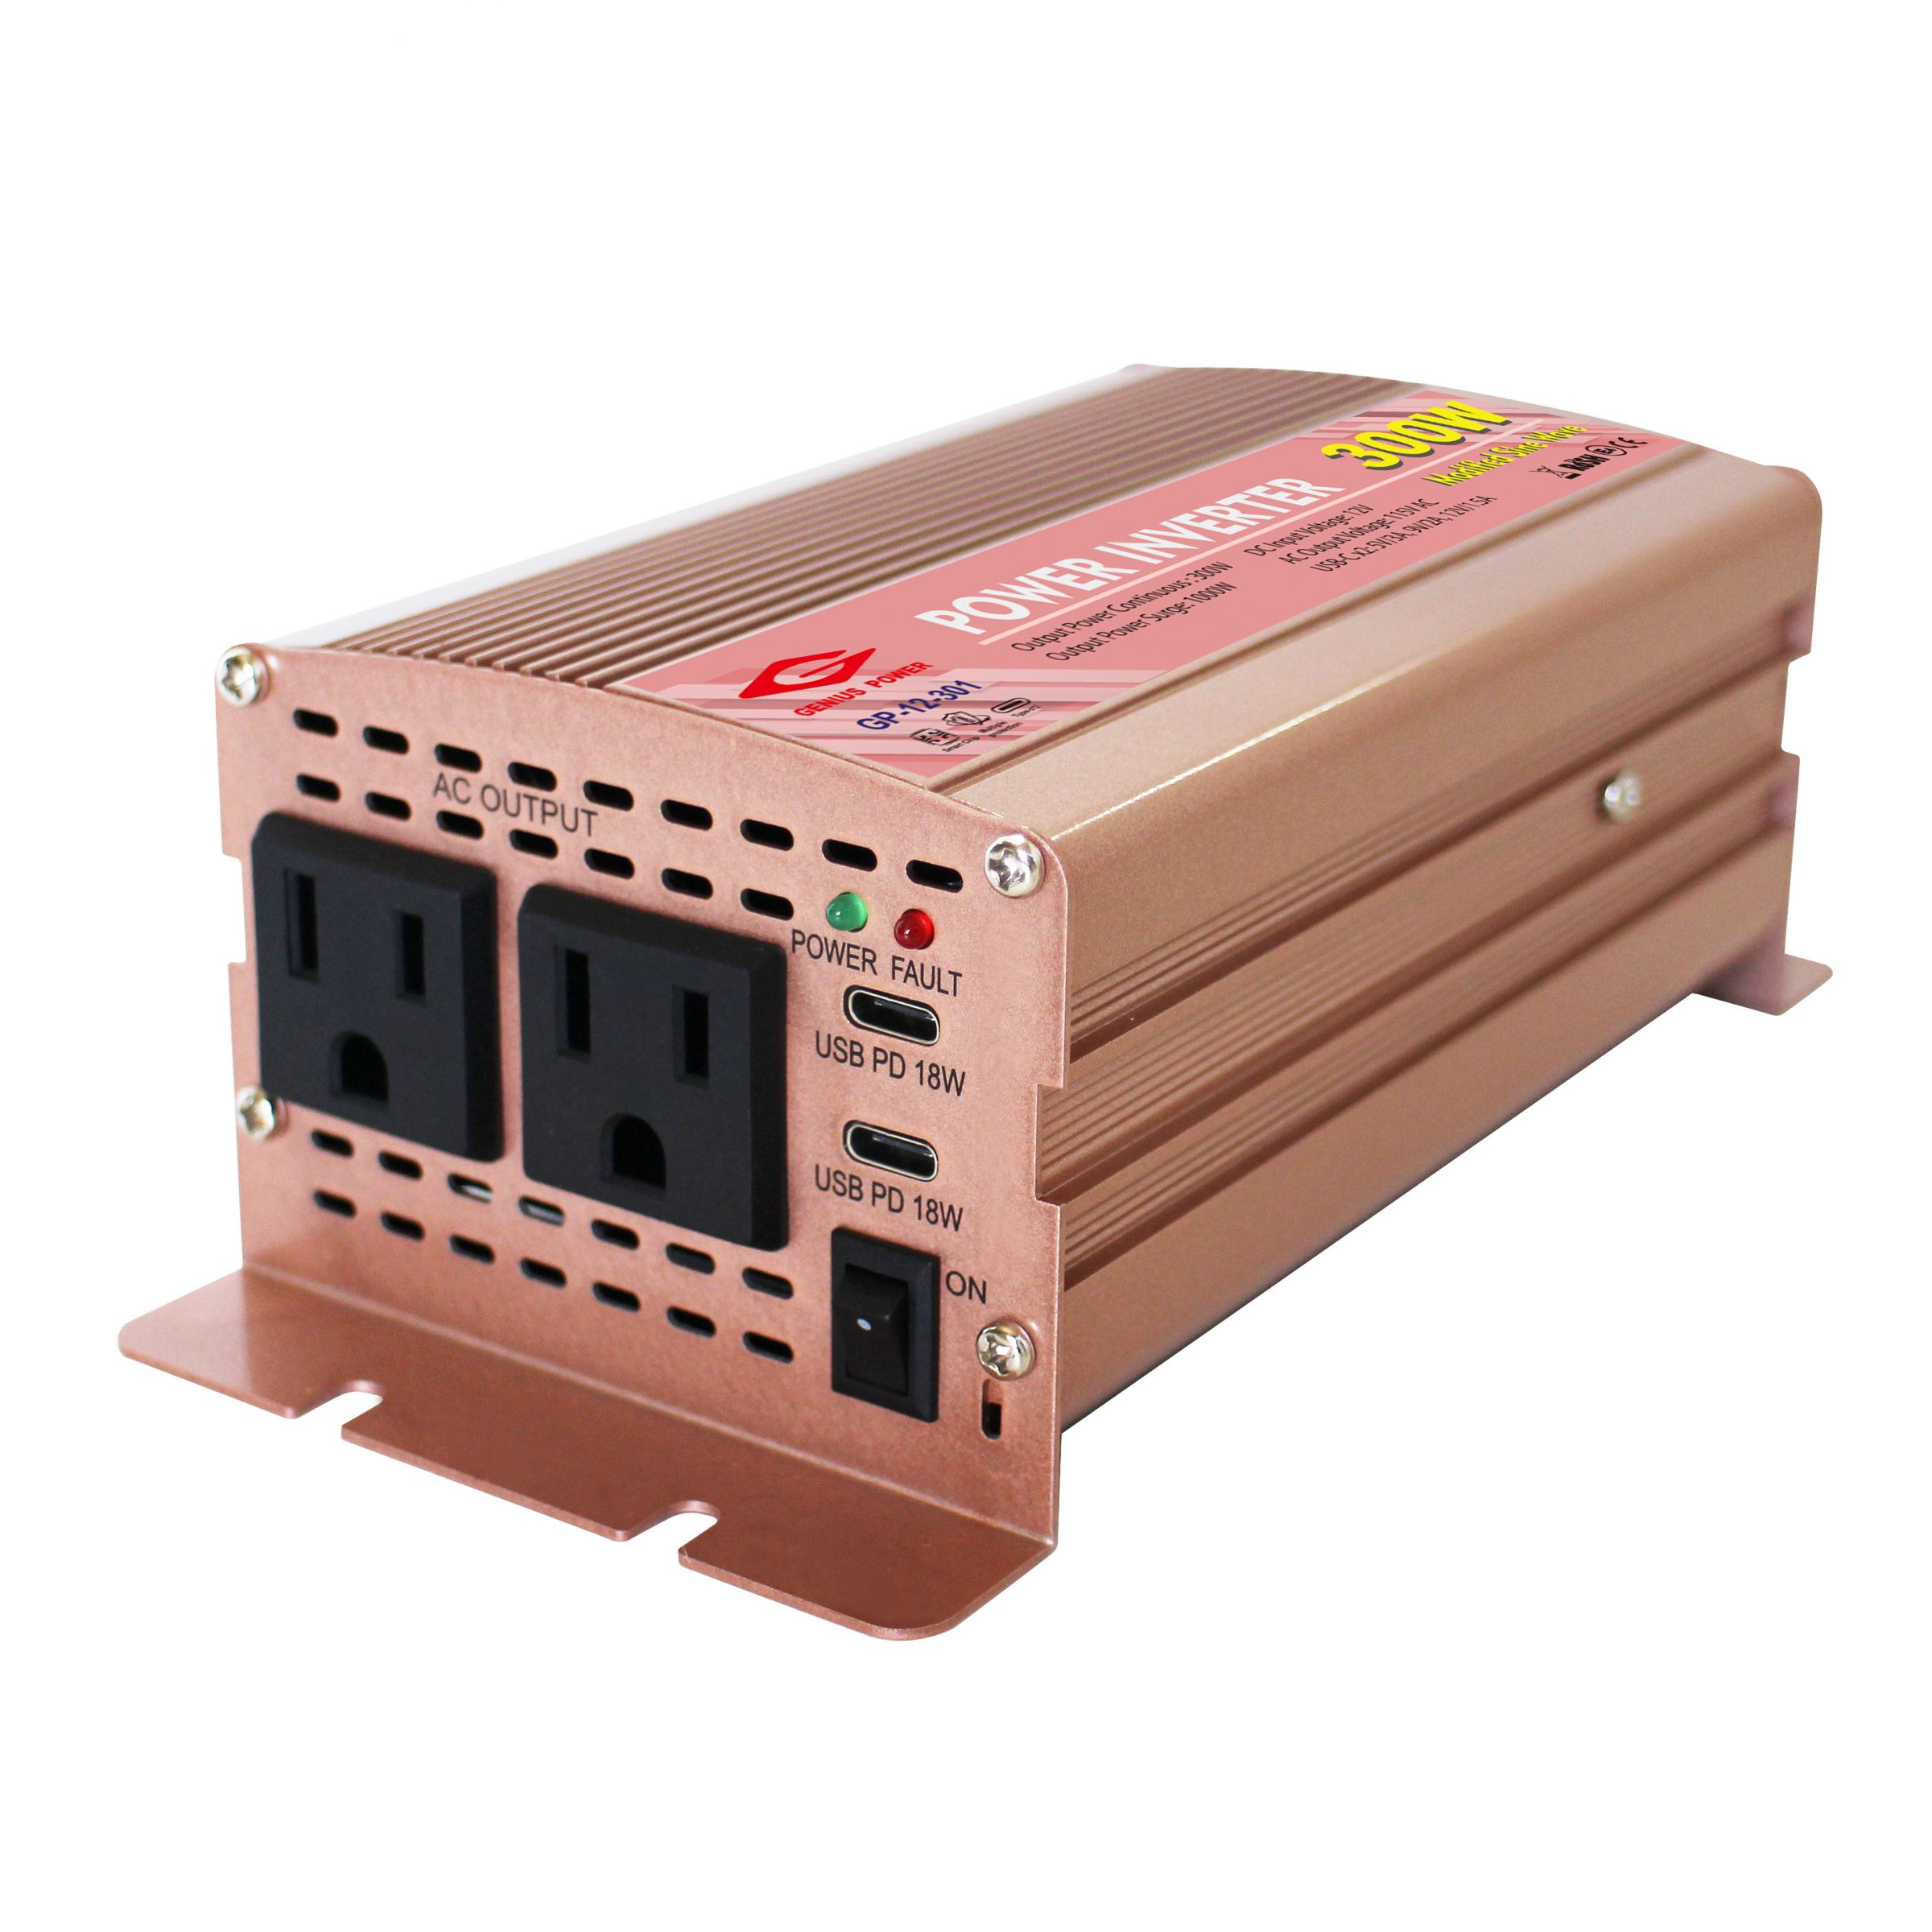 GP-301_front_1Mb.jpg::Power inverter with usb type-c